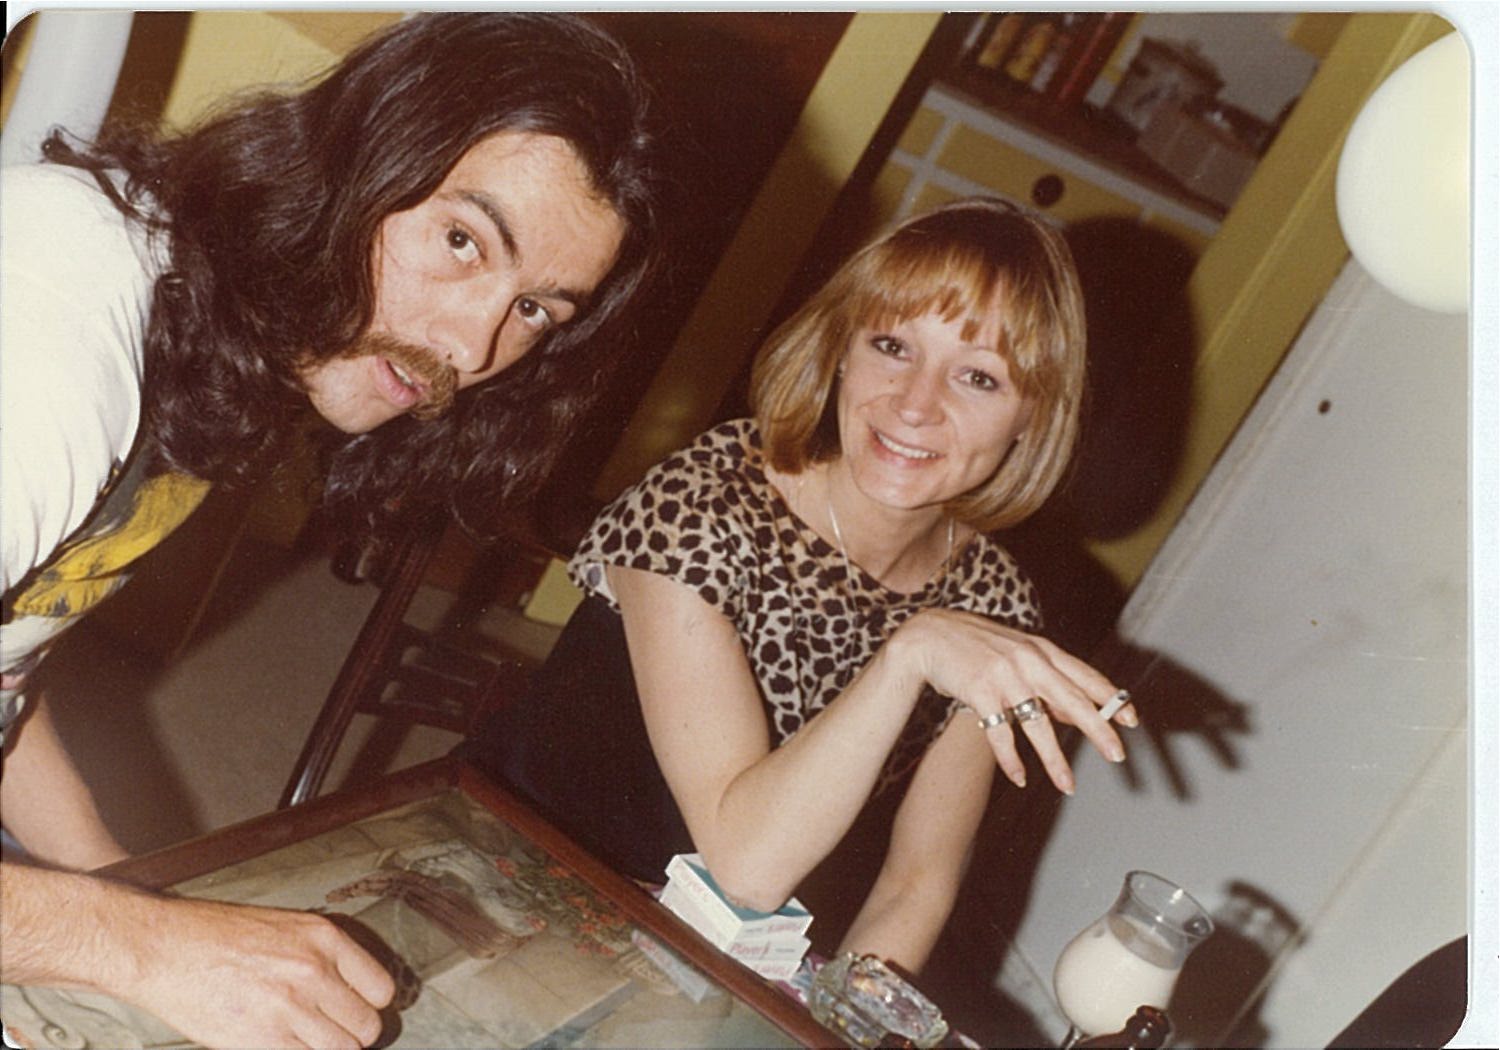 person with long dark hair and mustache leaning over table, person with strawberry blond hair wearing blouse sitting at table